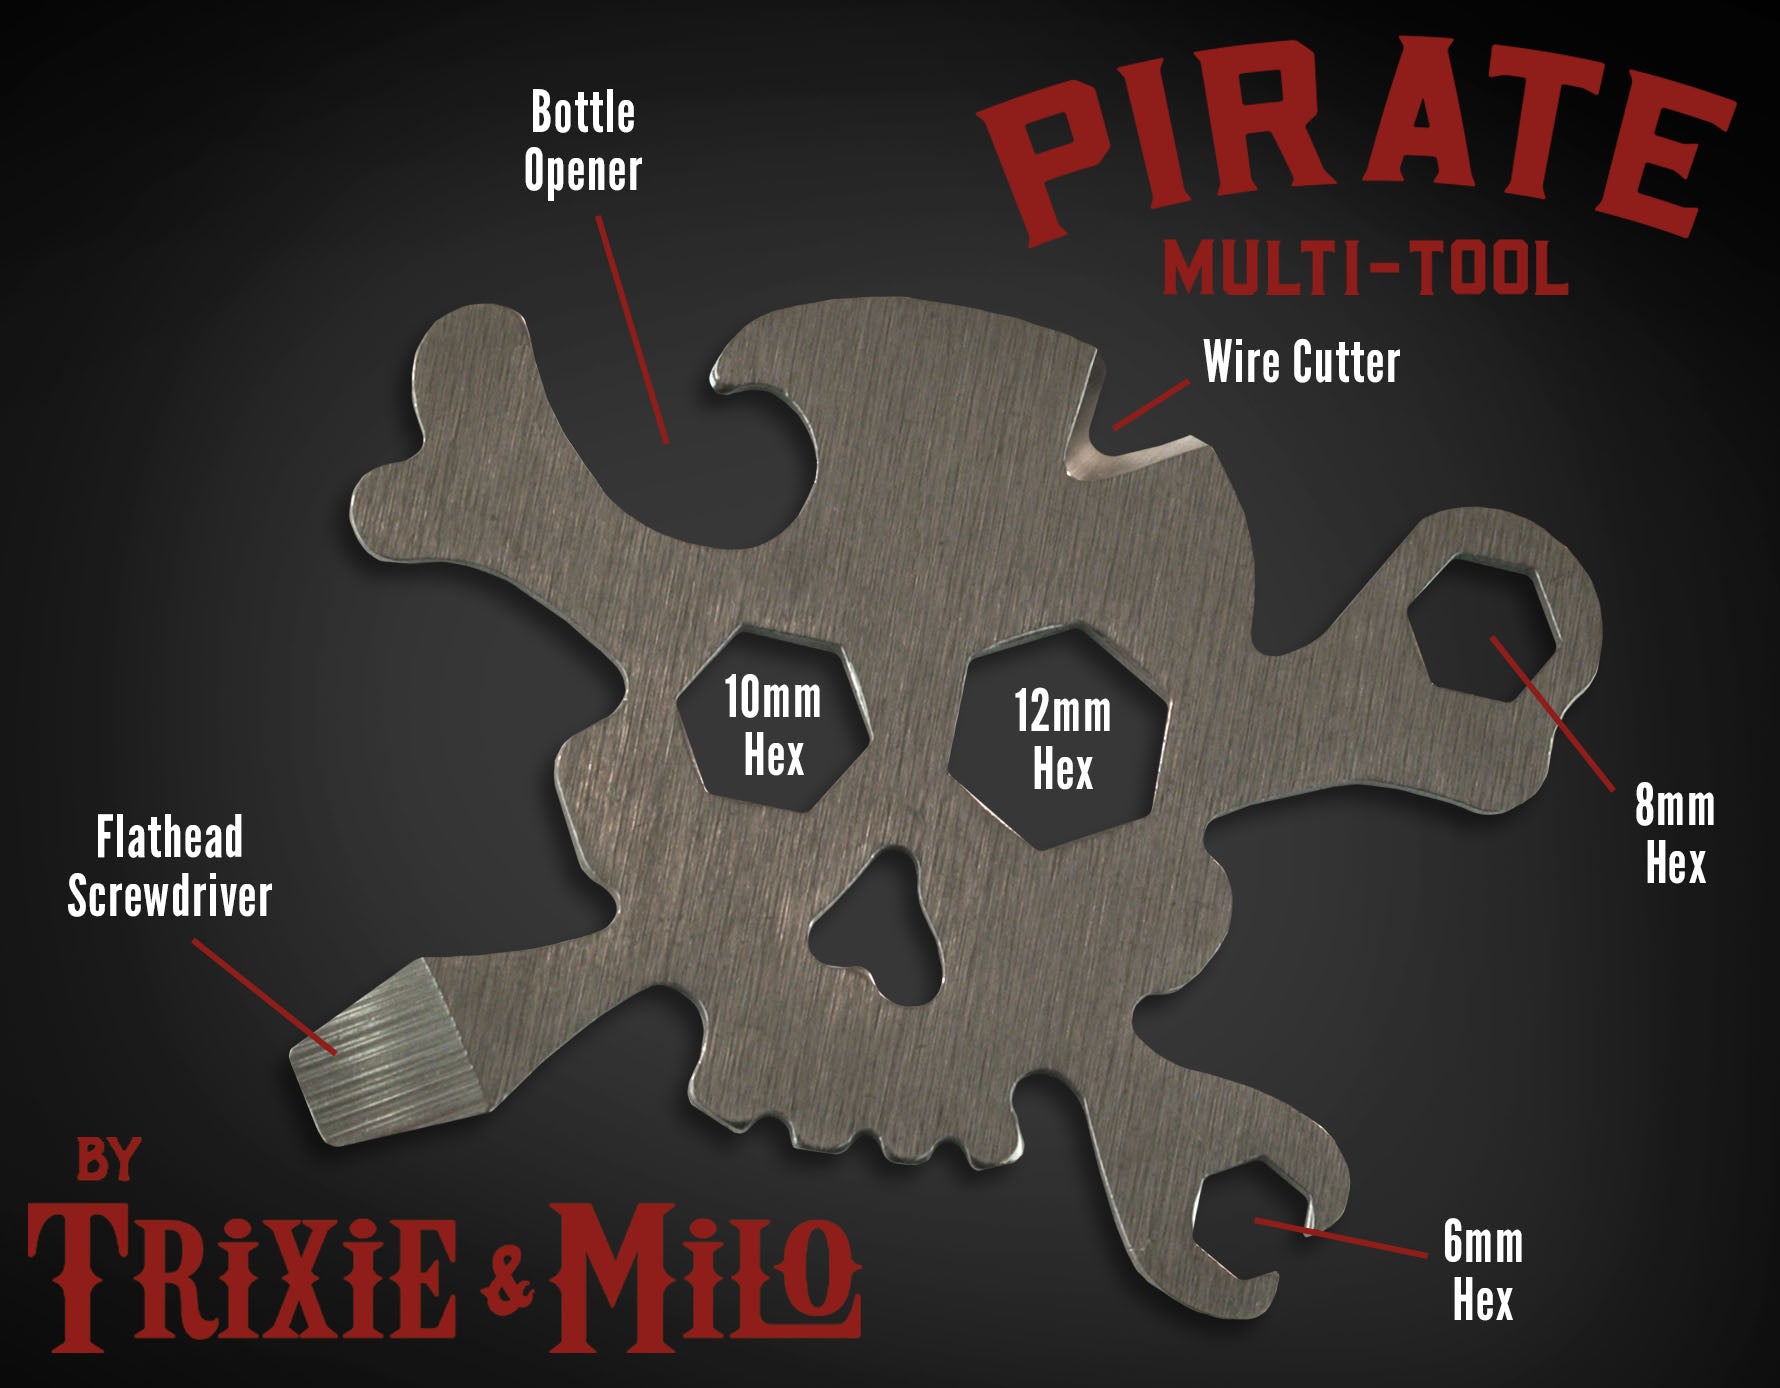 Pirate Multi tool by Trixie & Milo. Great men's gift, key chain tool, multi tool for your pocket